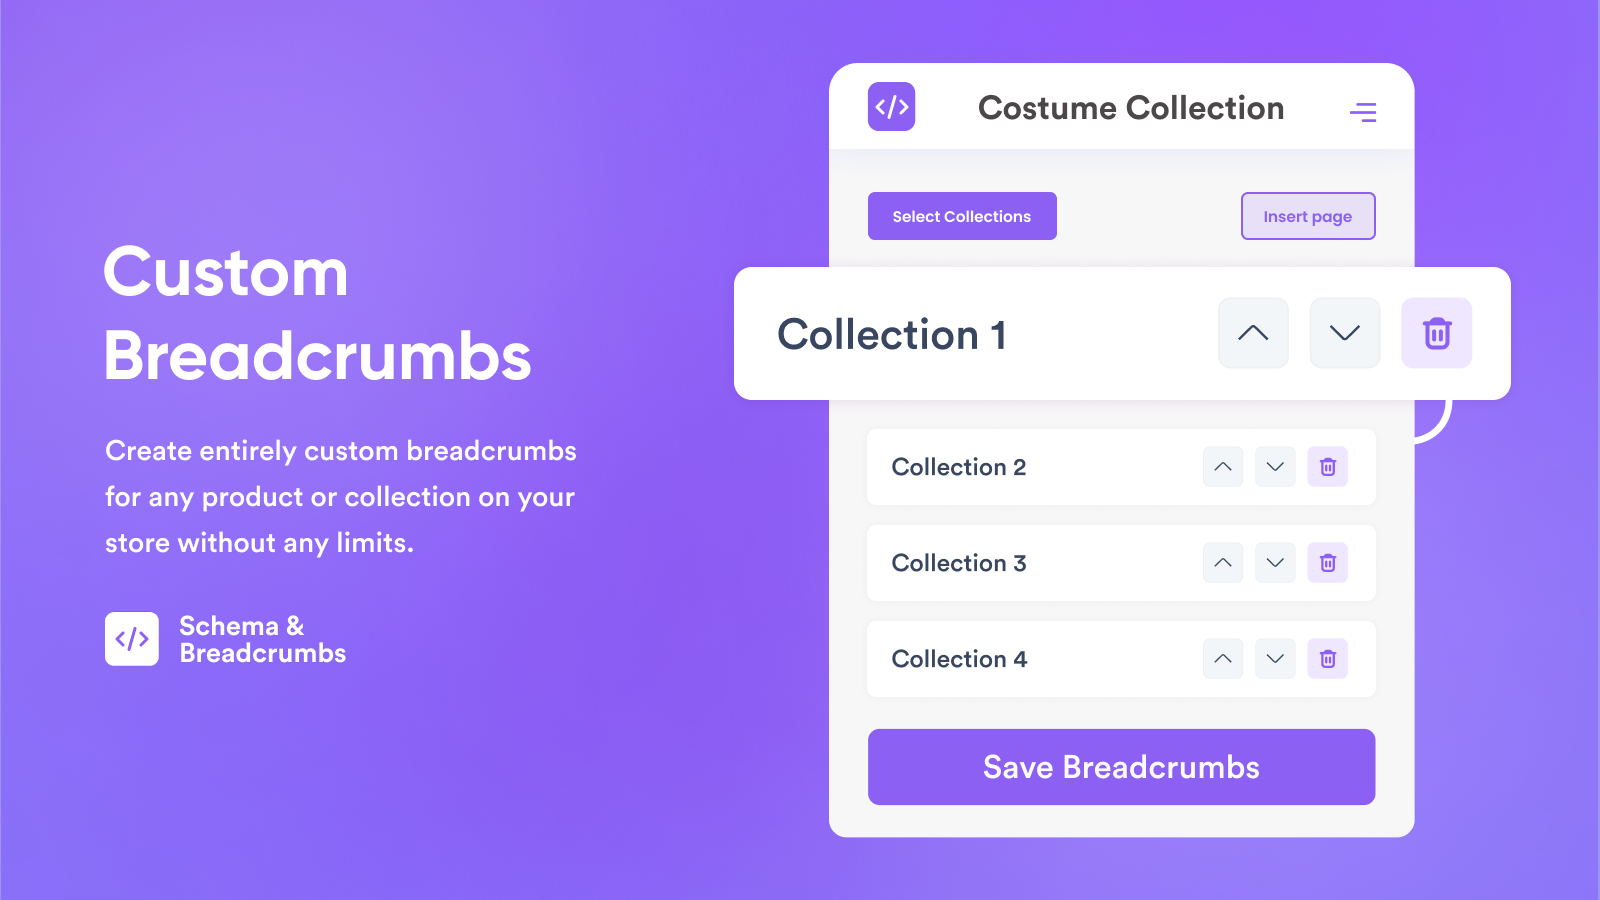 Manually create breadcrumbs for any product or collection